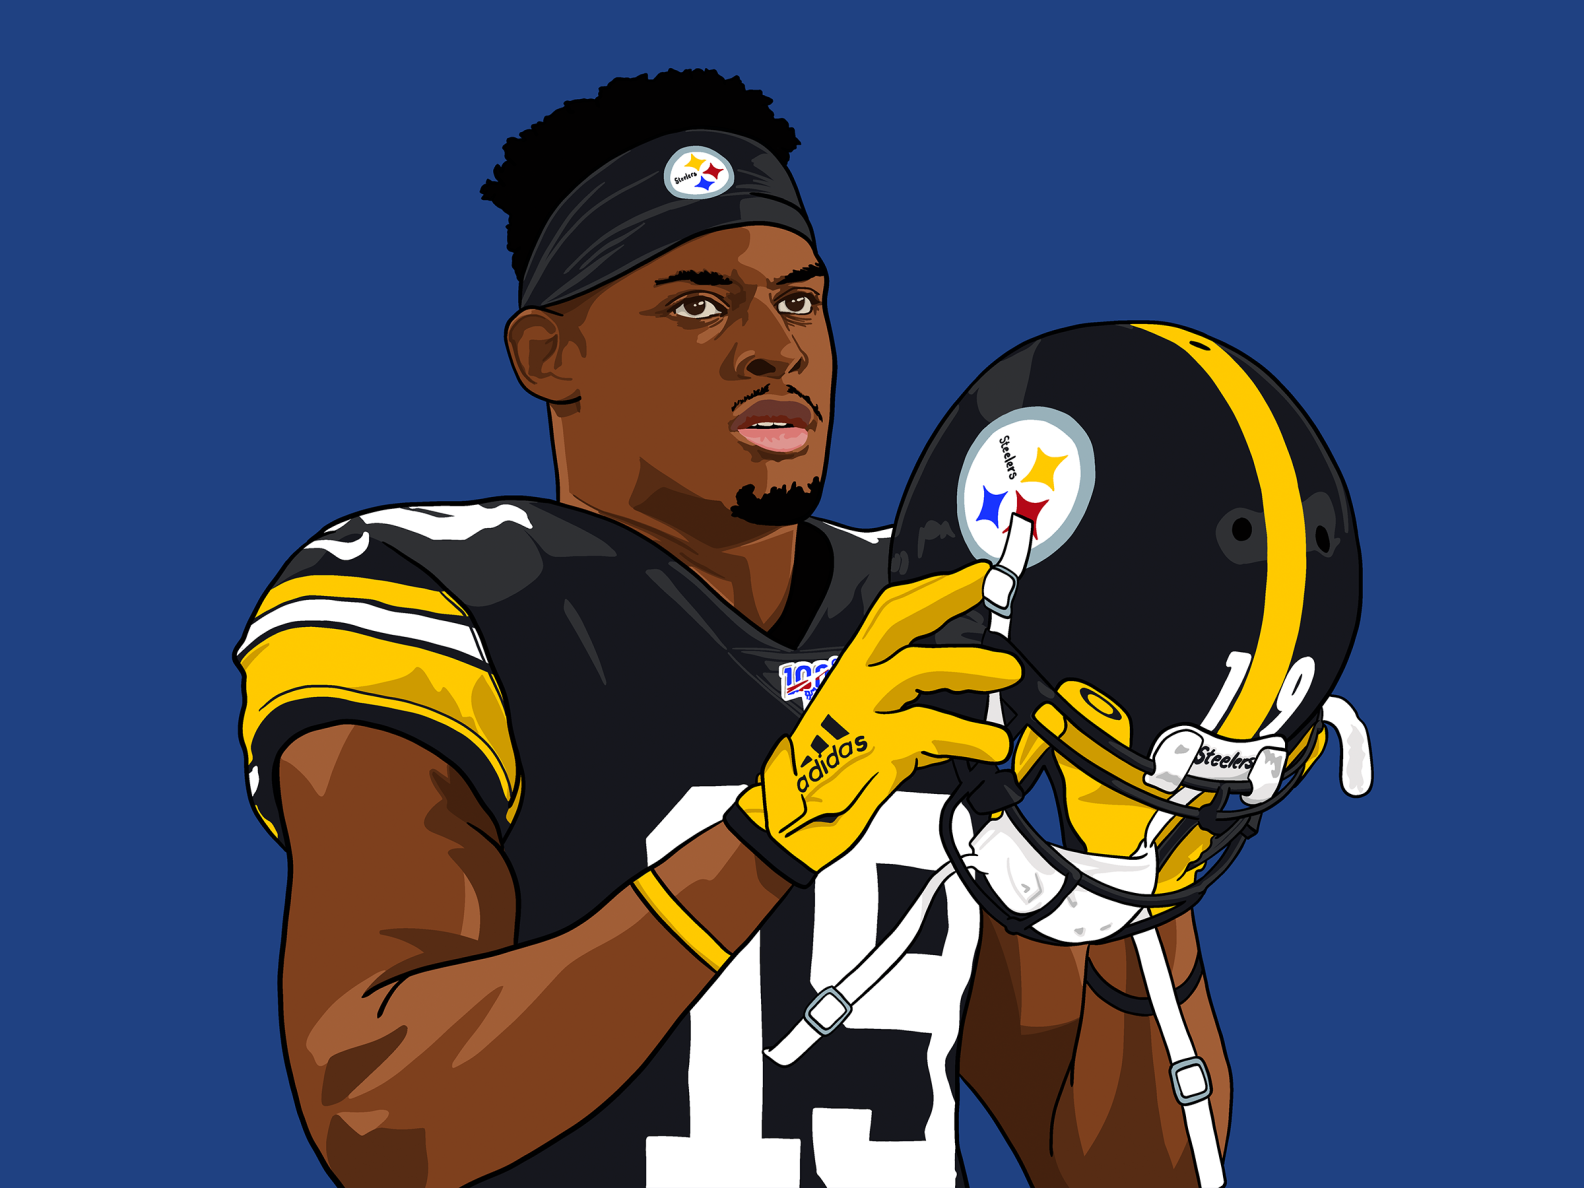 Juju Smith-Schuster by Vincent Pettofrezzo on Dribbble